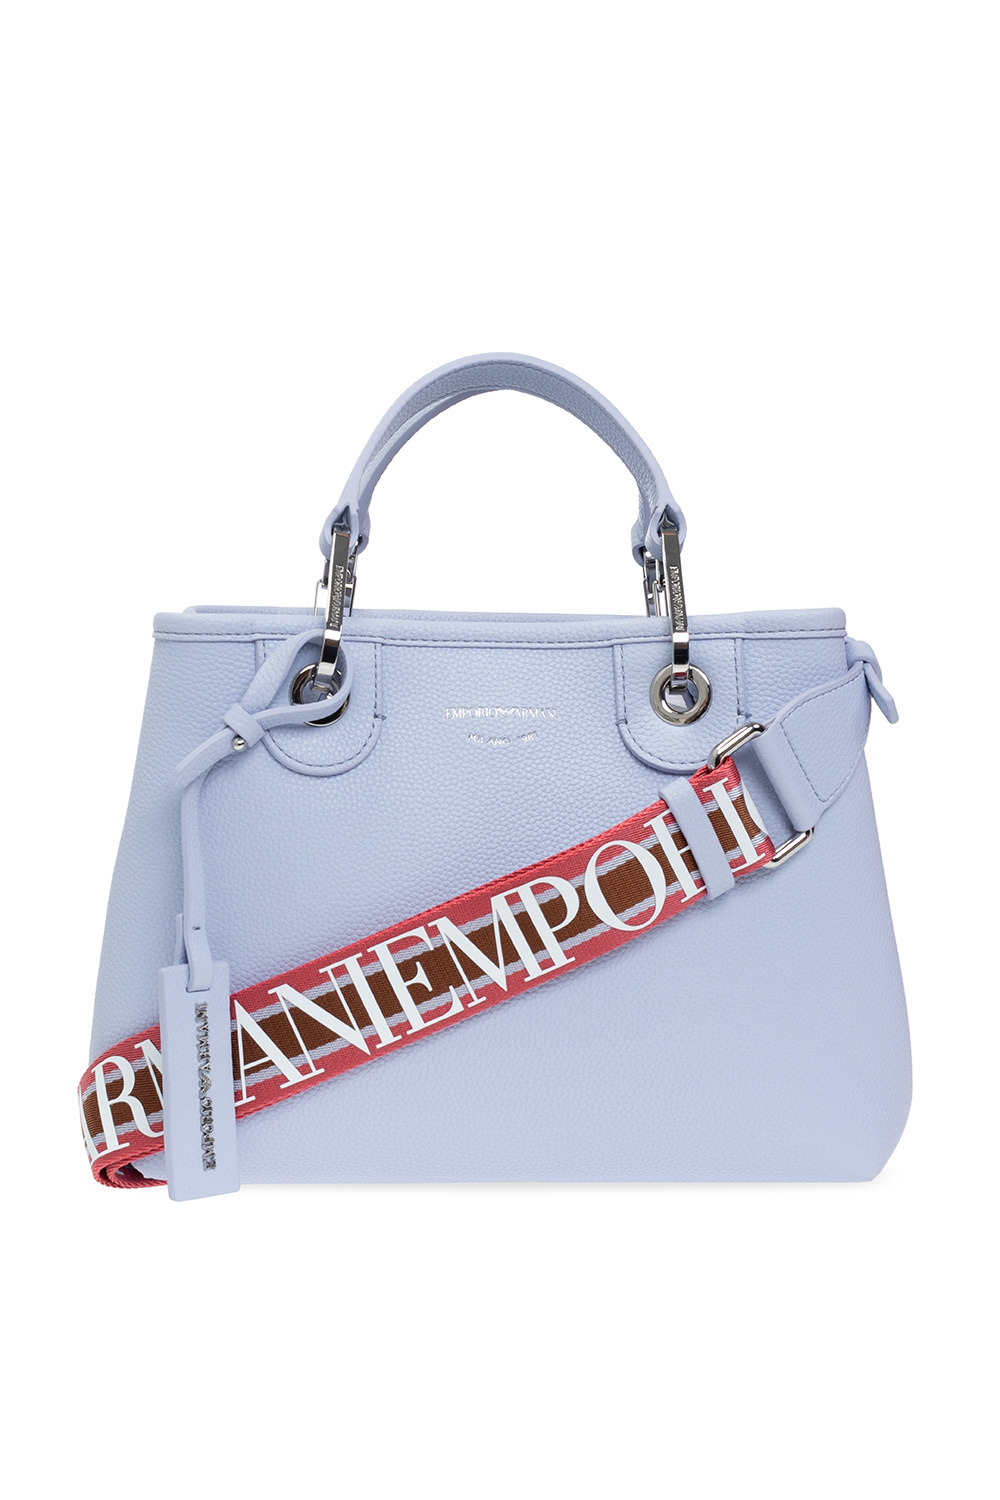 Emporio Armani Women's Train Core Small Recycled Fabric Shoulder Bag - Blue - Shoulder Bags